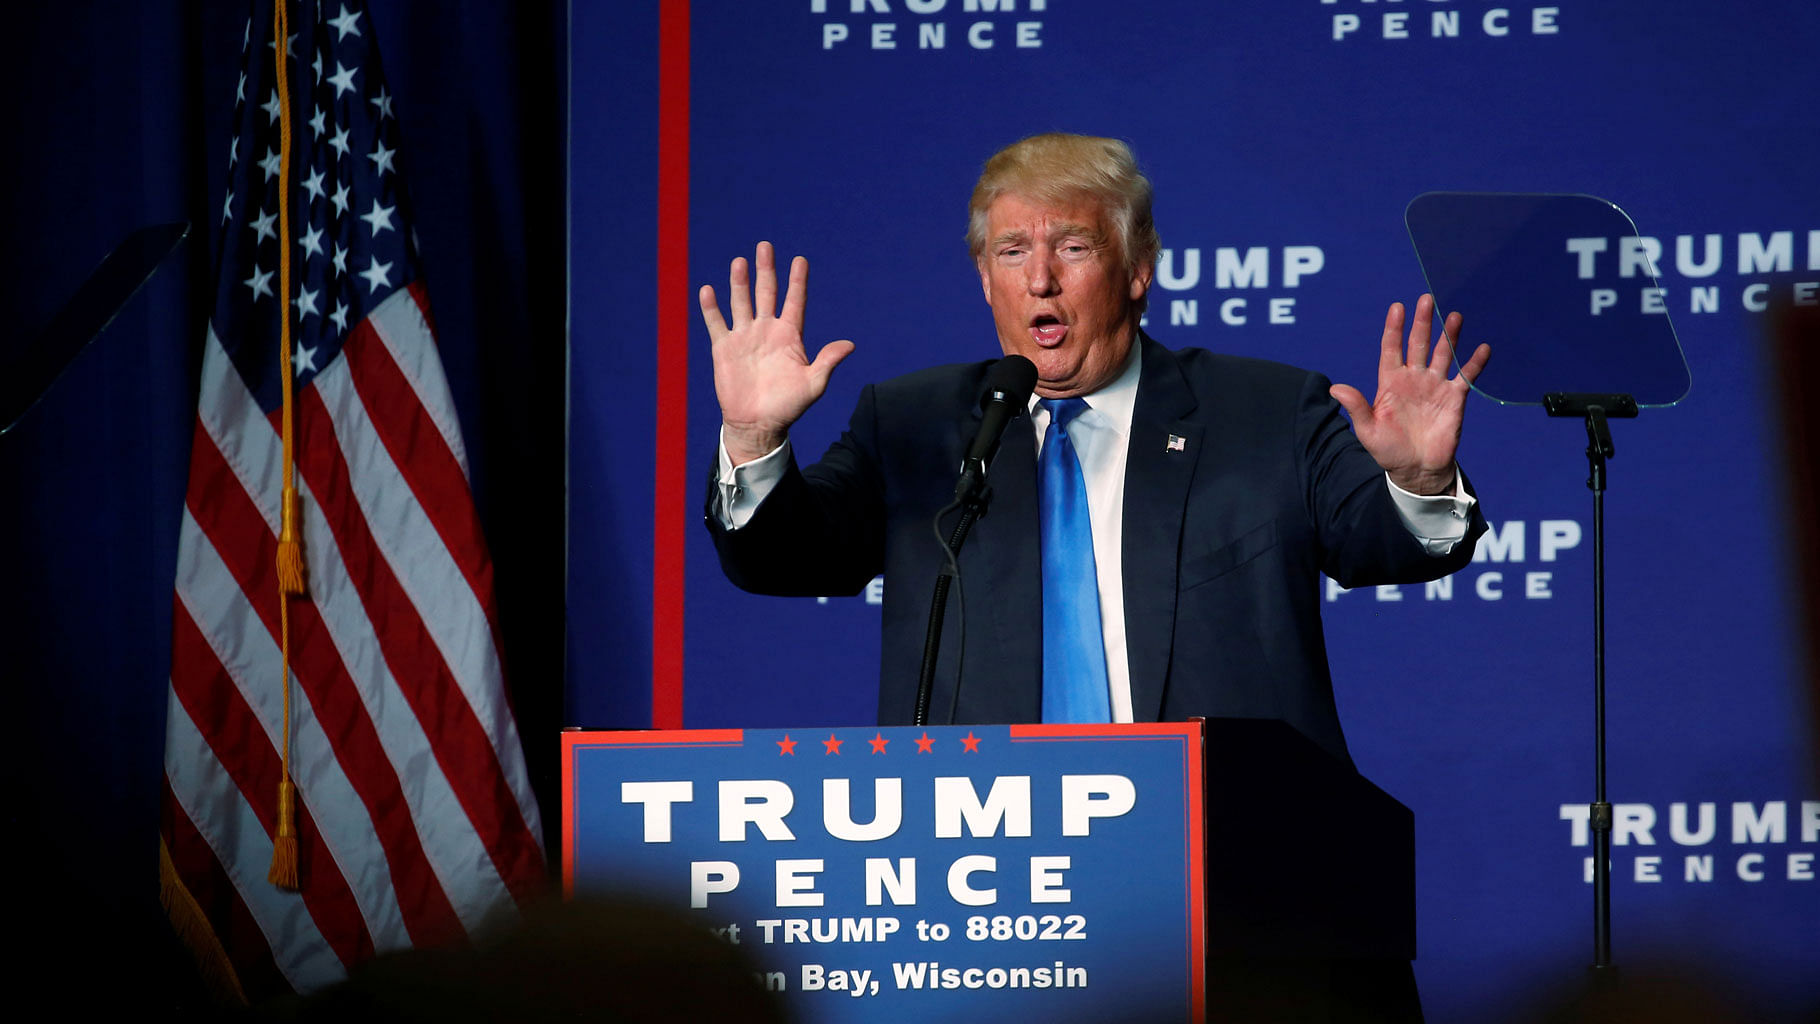 Republican presidential nominee Donald Trump holds a campaign rally in Green Bay, Wisconsin, U.S. (Photo: Reuters)